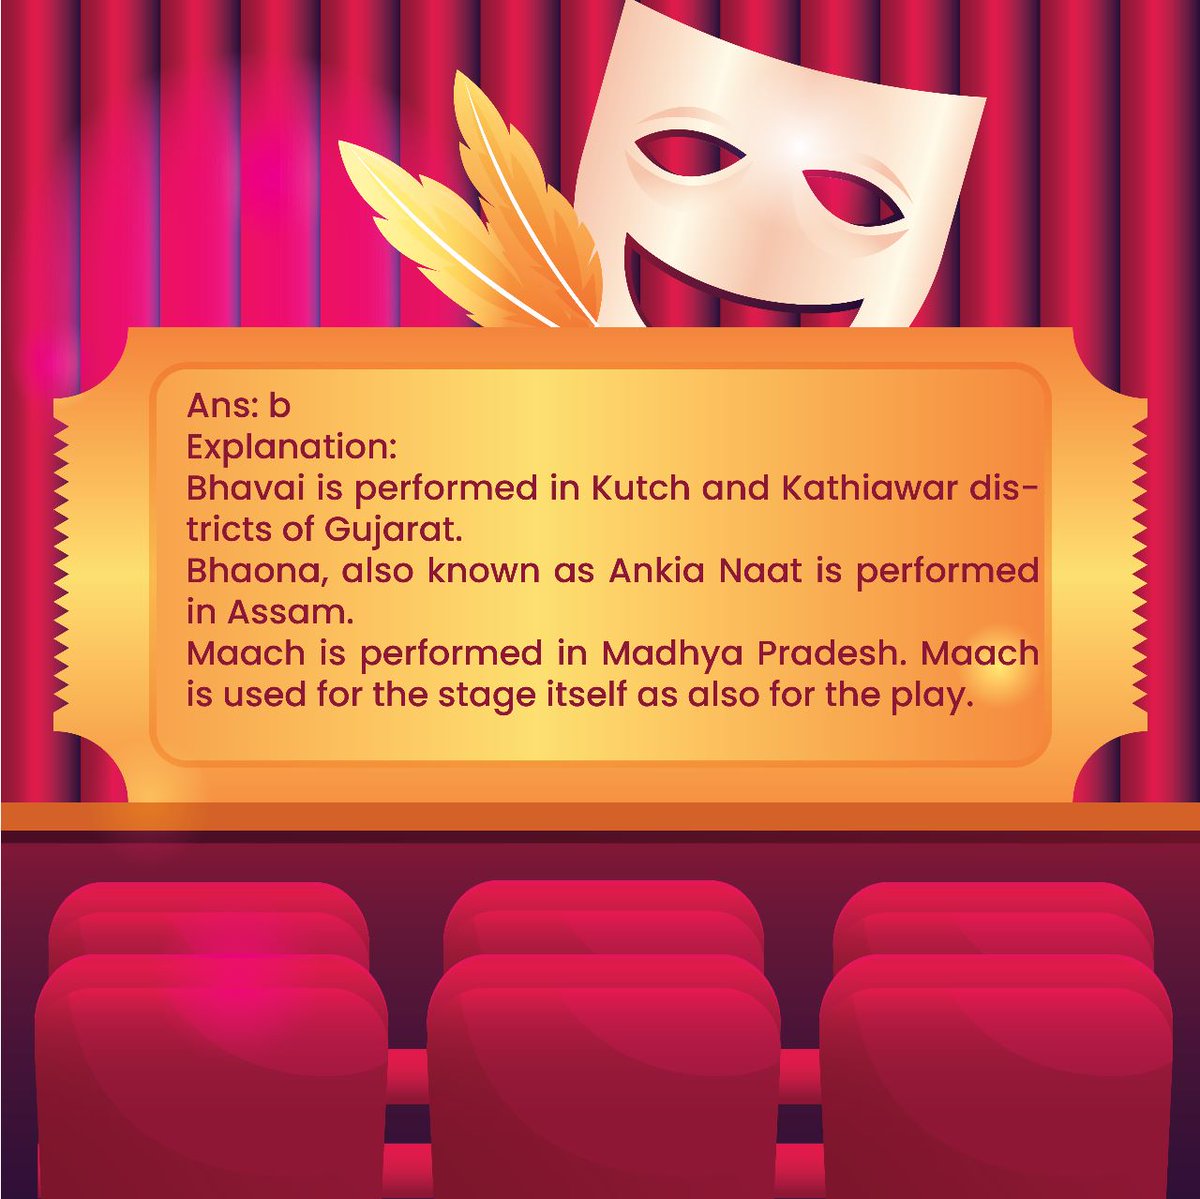 There is something so special and unique about theatres that we must all experience and value. 
Warm wishes on World Theatre Day!
#WorldTheatreDay #Theatre #LiveTheatre #LoveTheatre #UPSC #IAS #Entertainment #Art #ITI #TheatreLovers #Plays #Drama #TheatreLife #Khanglobalstudies